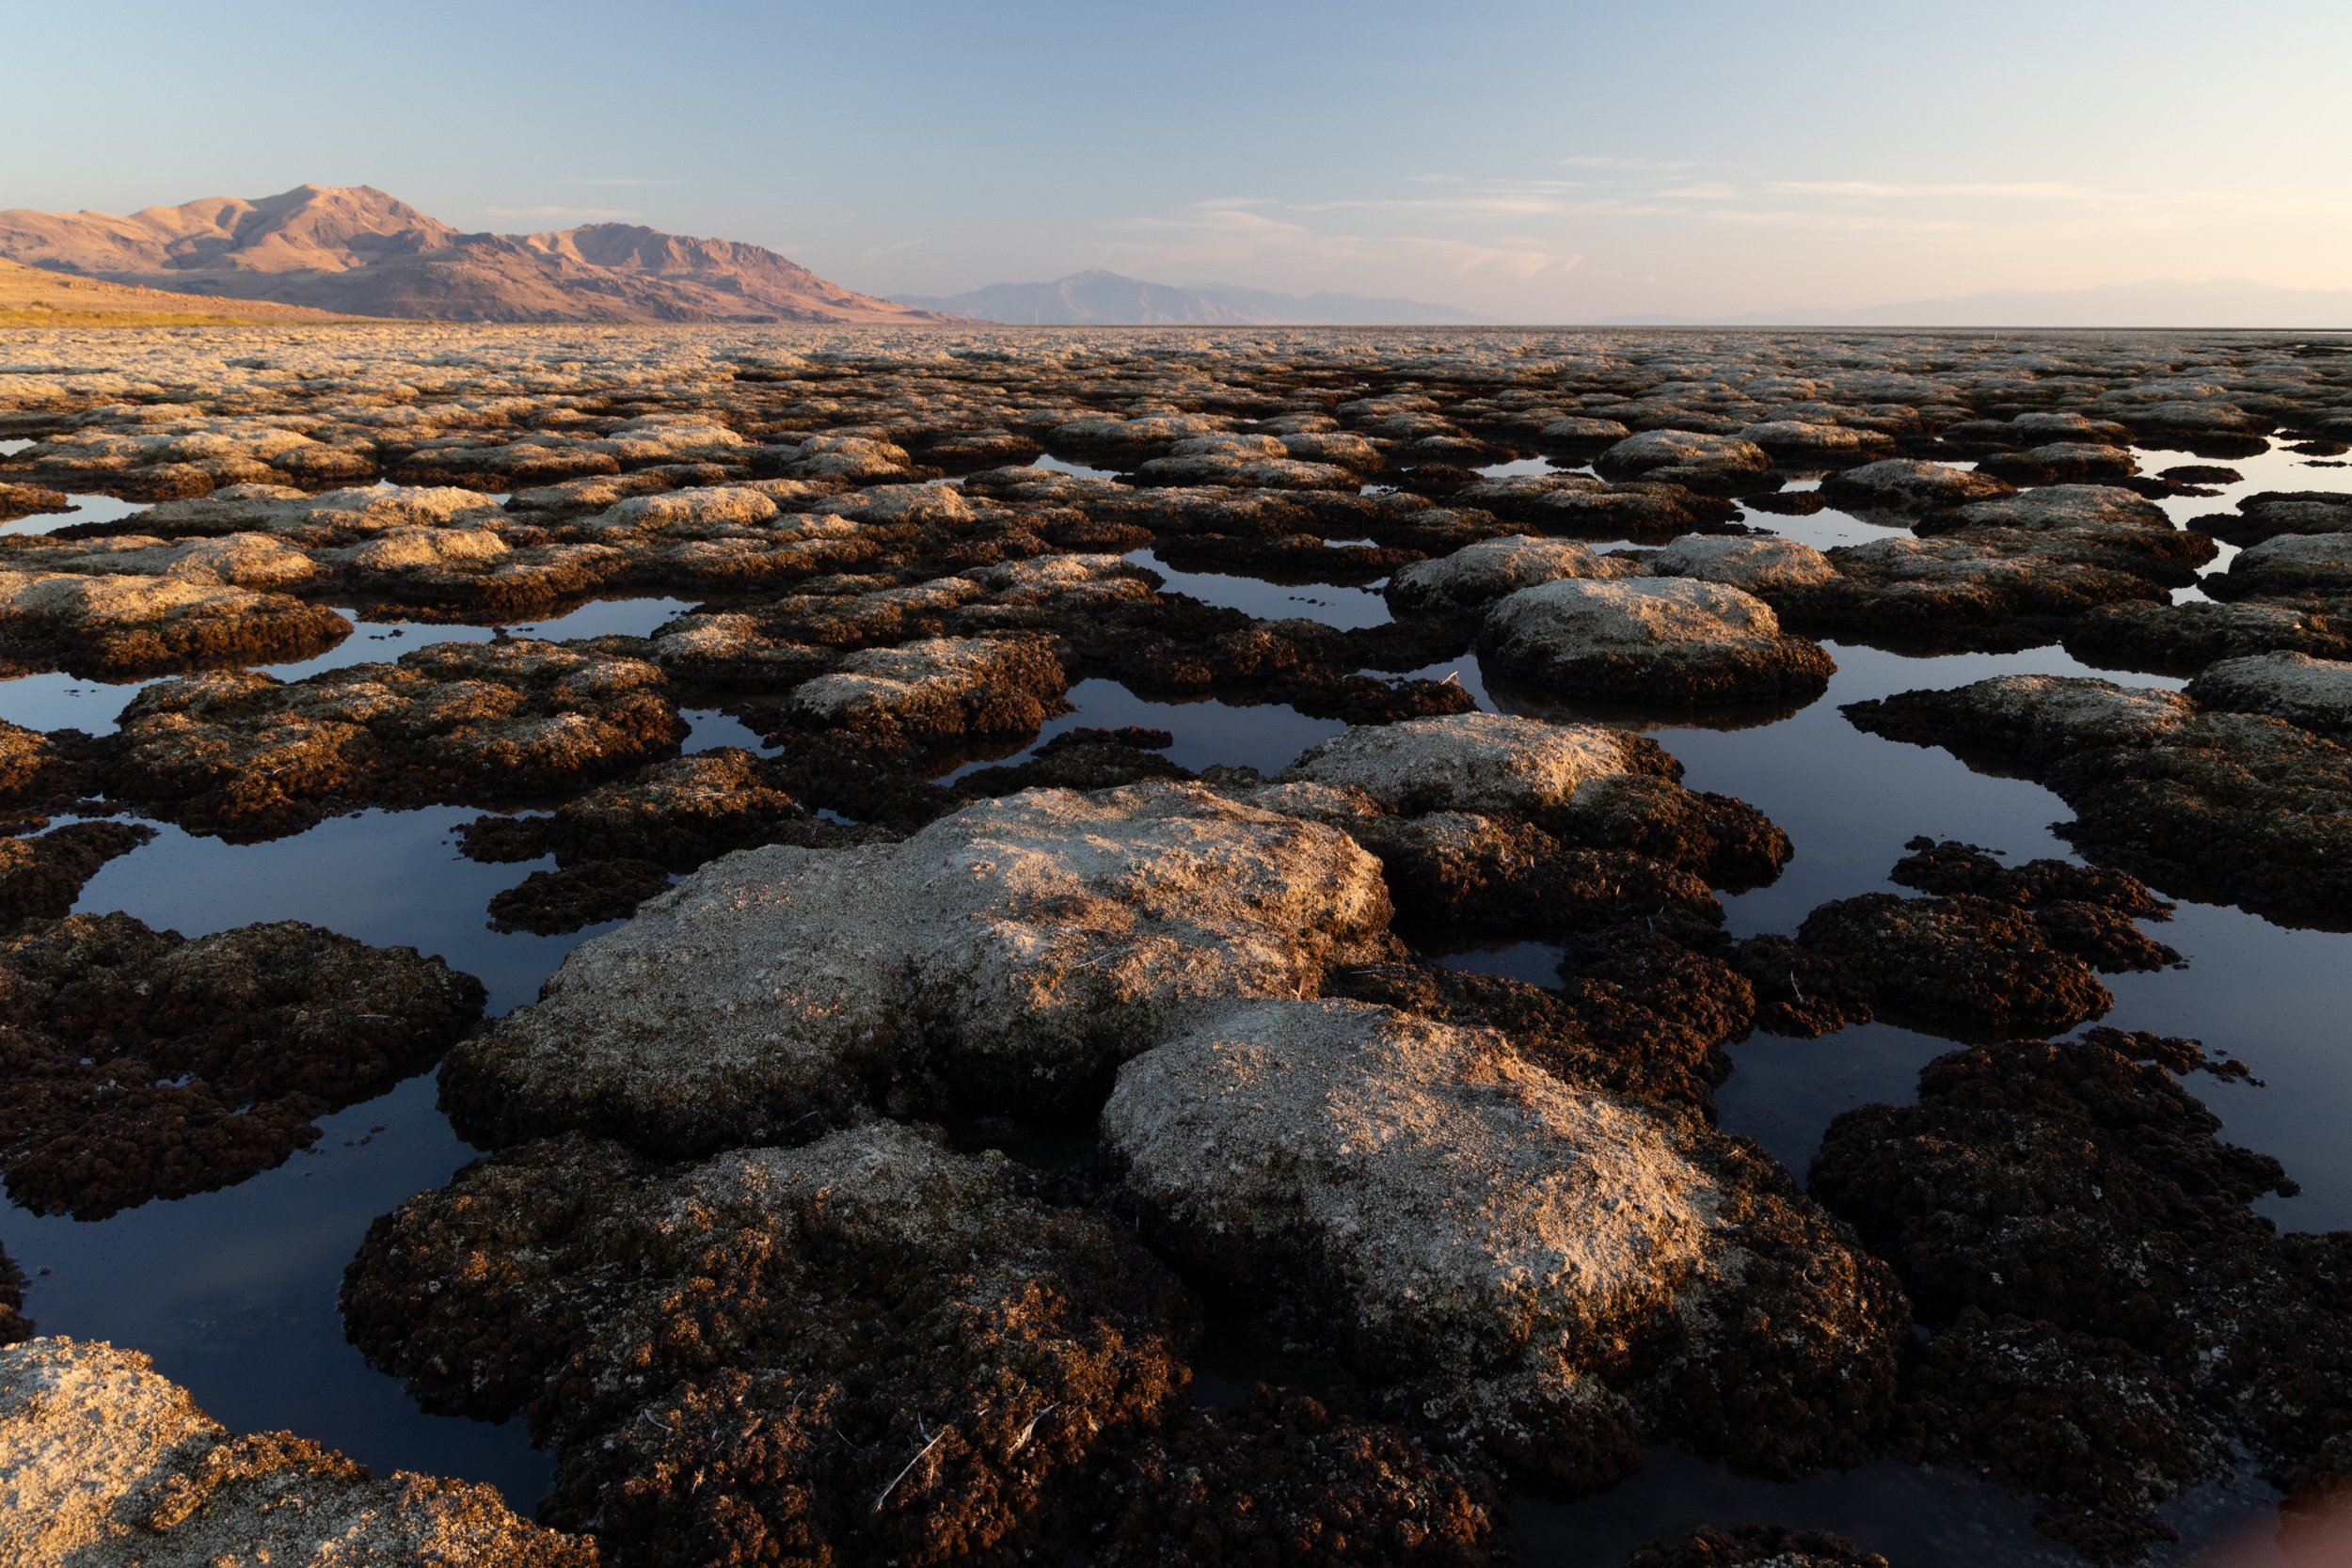  Exposed microbialites at Great Salt Lake. 